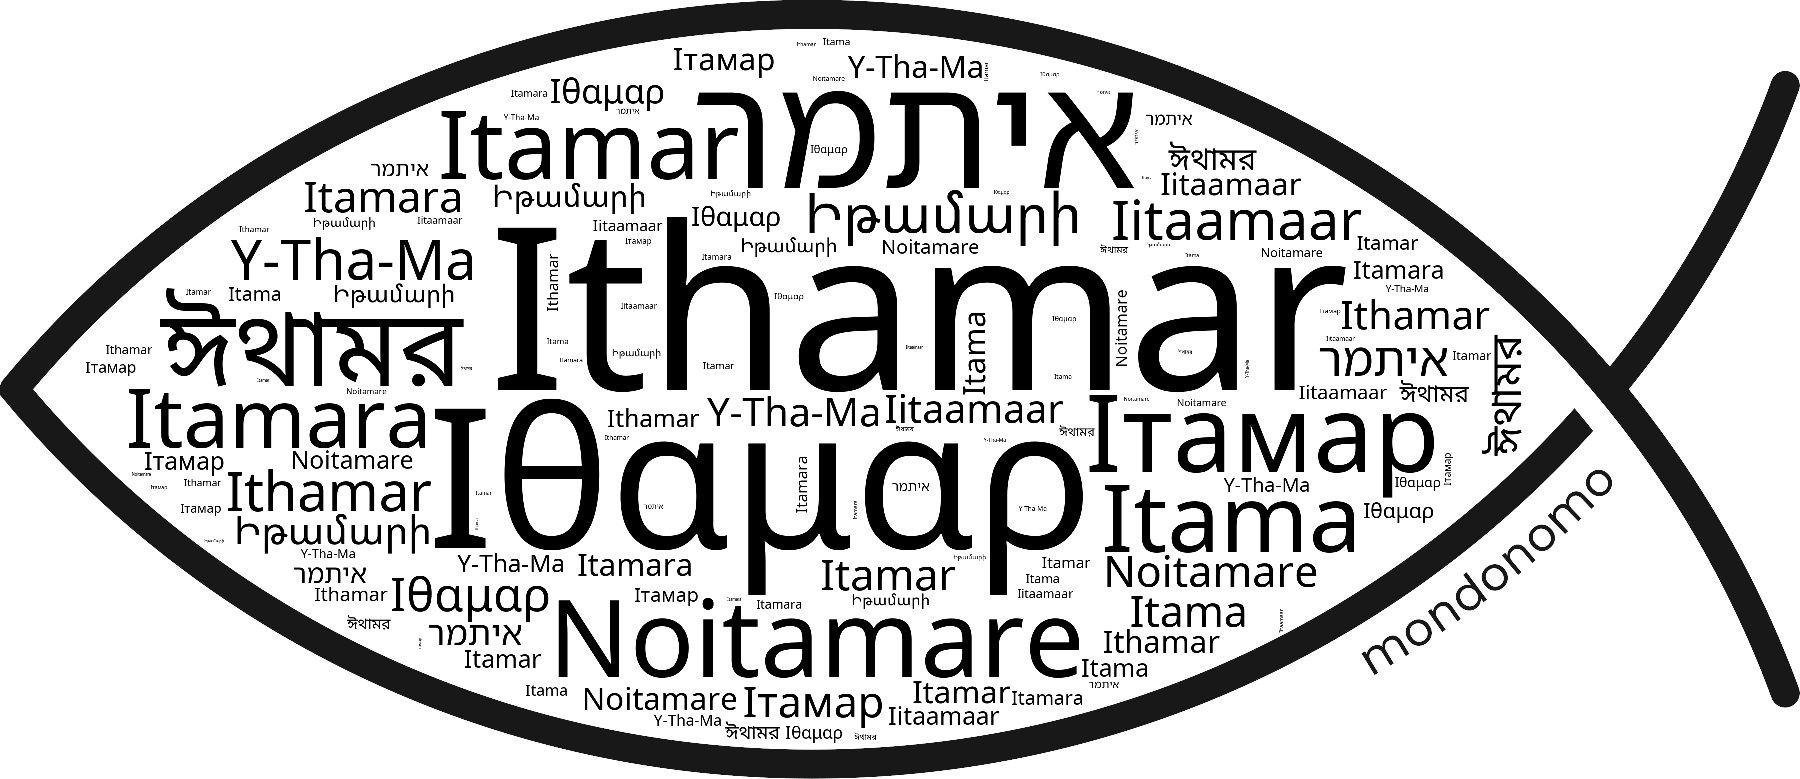 Name Ithamar in the world's Bibles